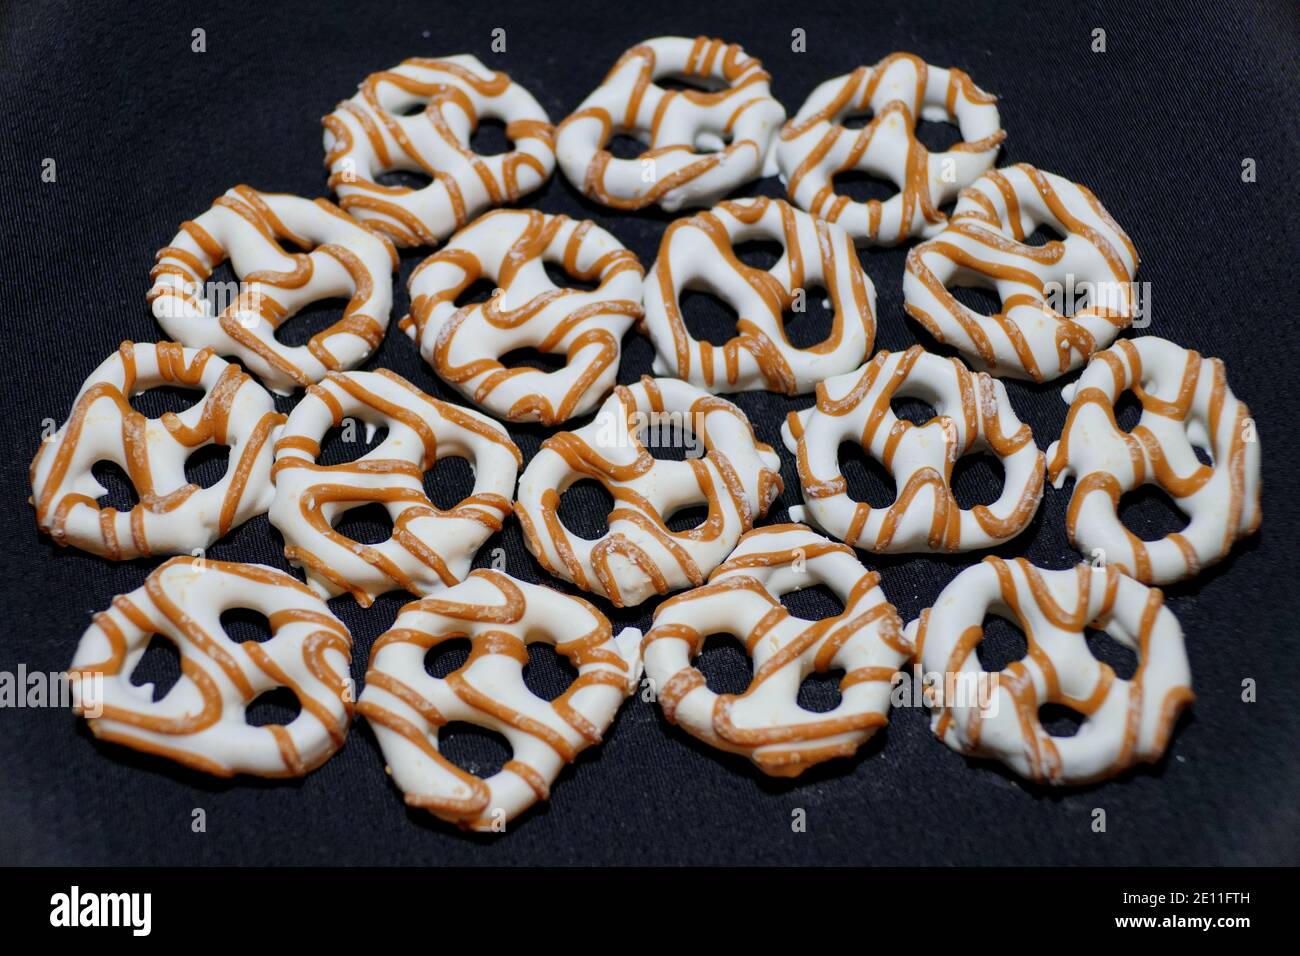 Yogurt pretzels with caramel drizzles on a black isolated background Stock Photo